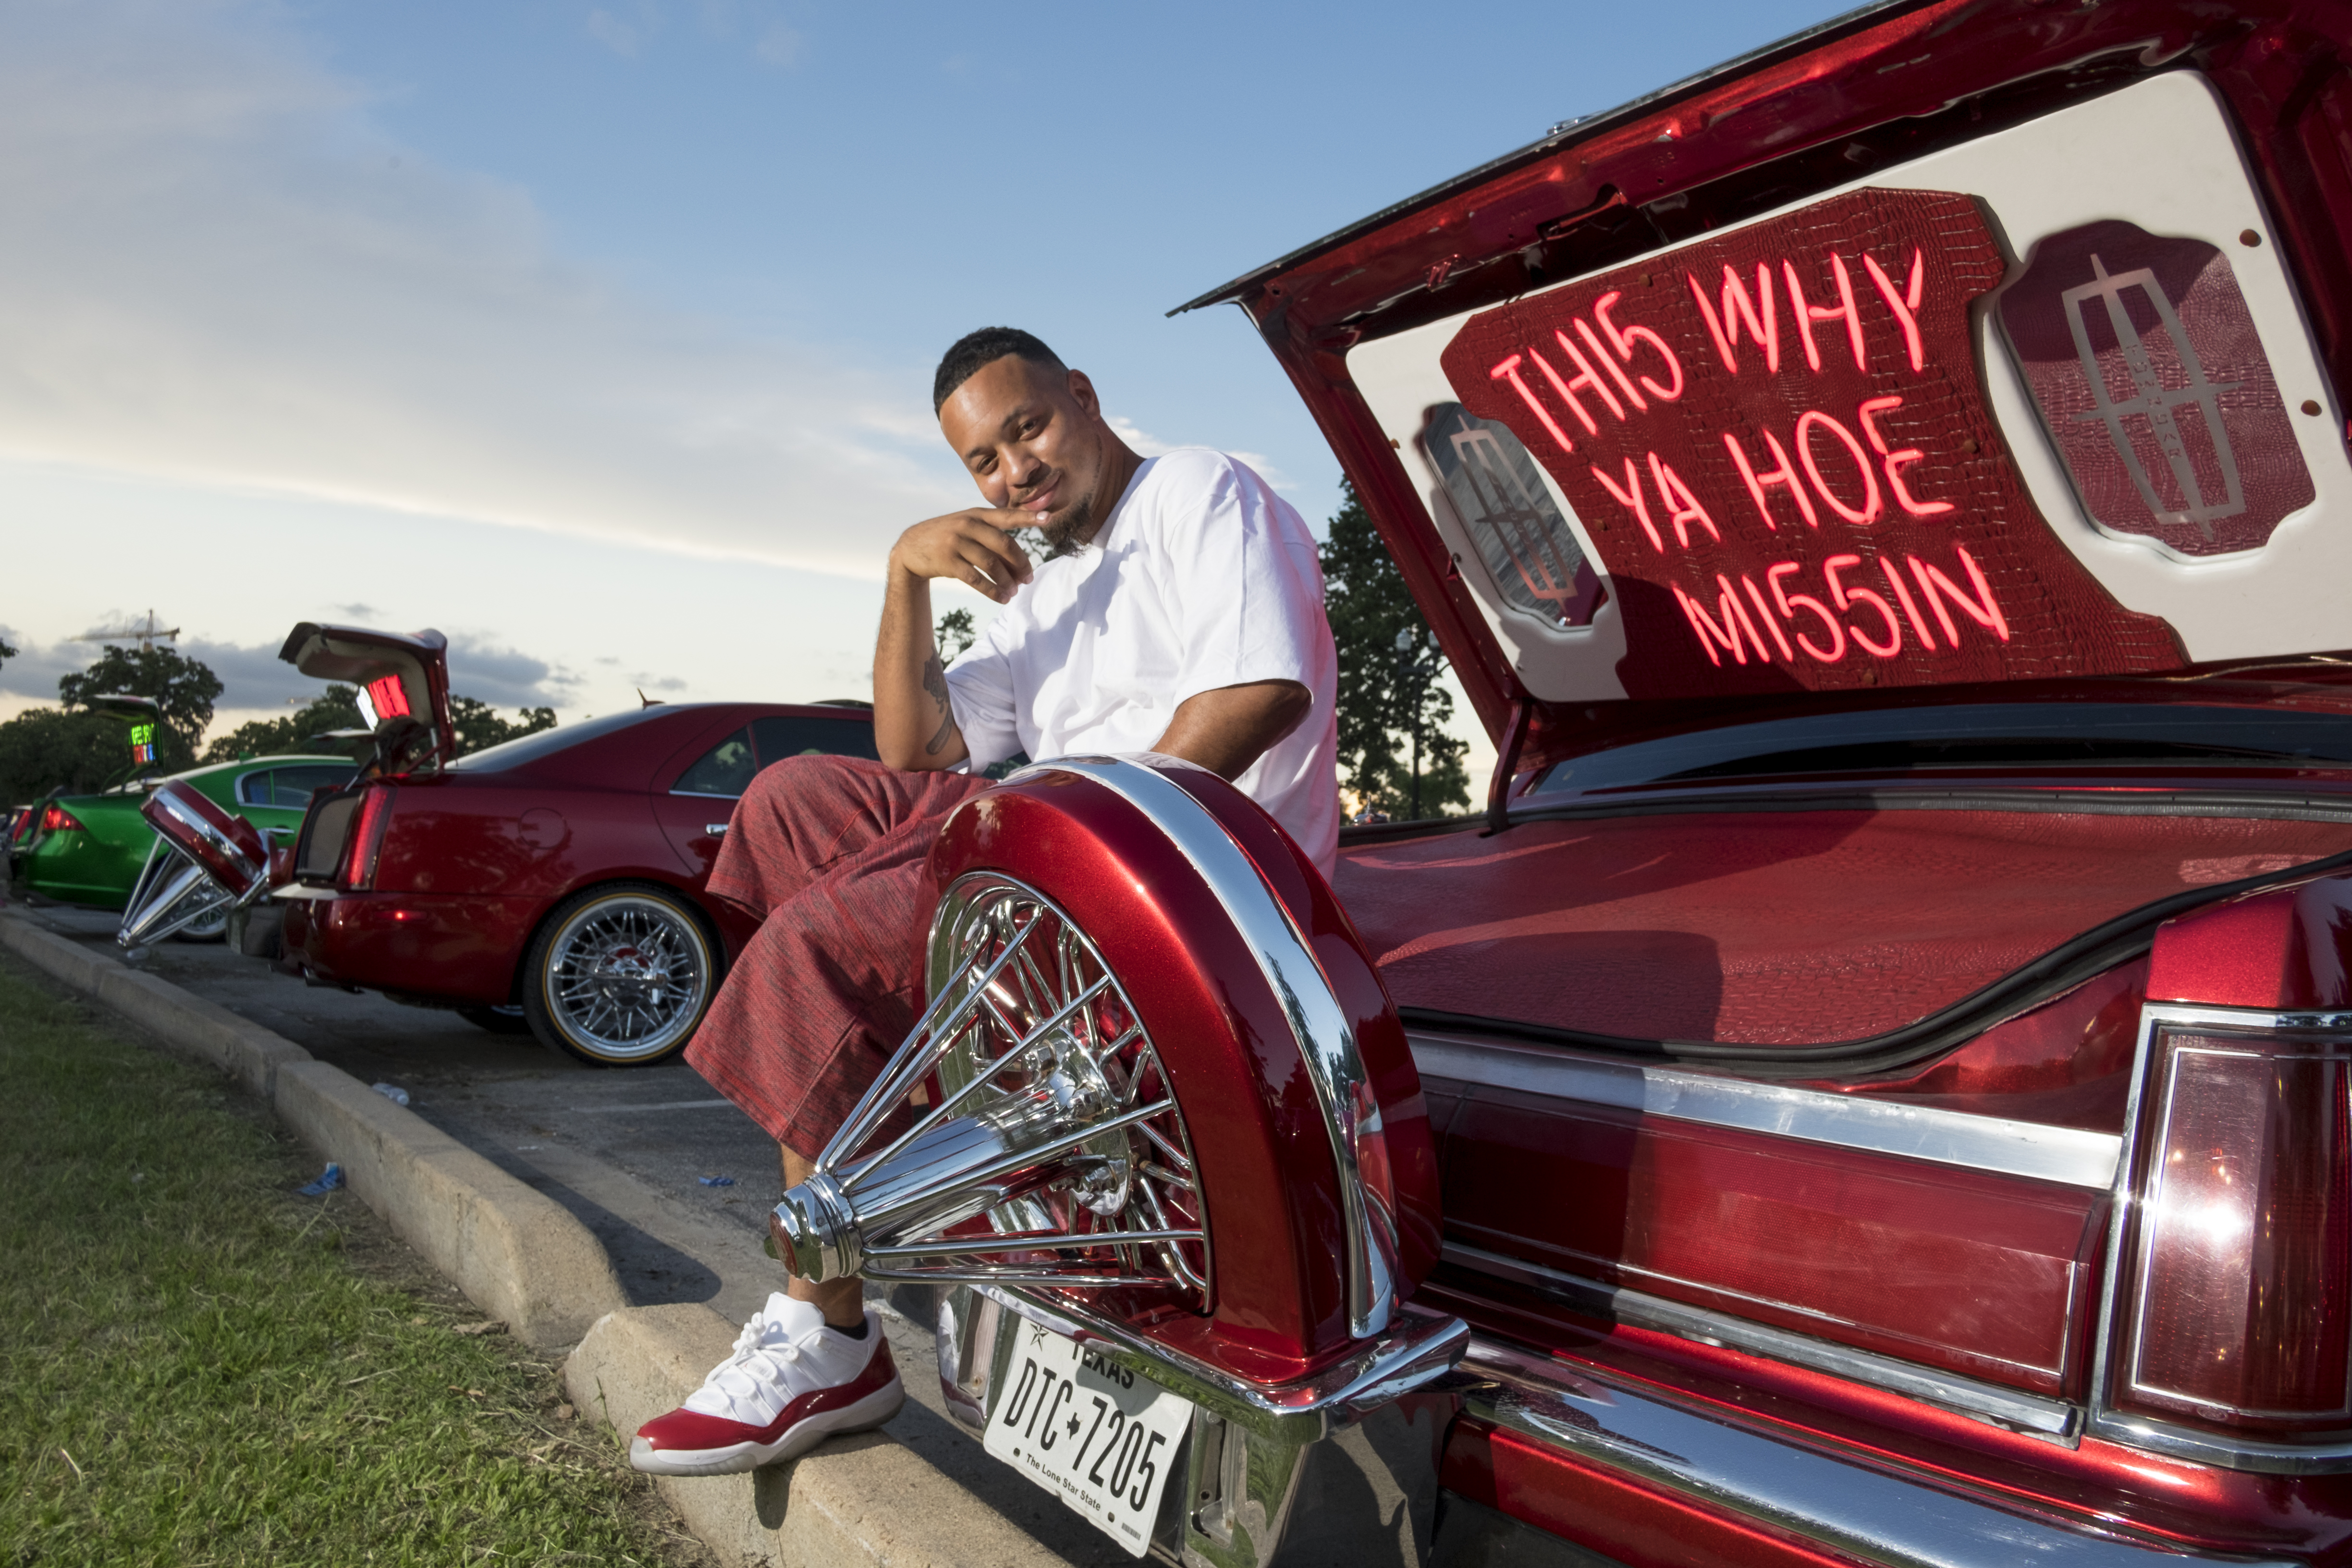 Houston's tricked-out, bright and shiny boatlike cars are mesmerizing